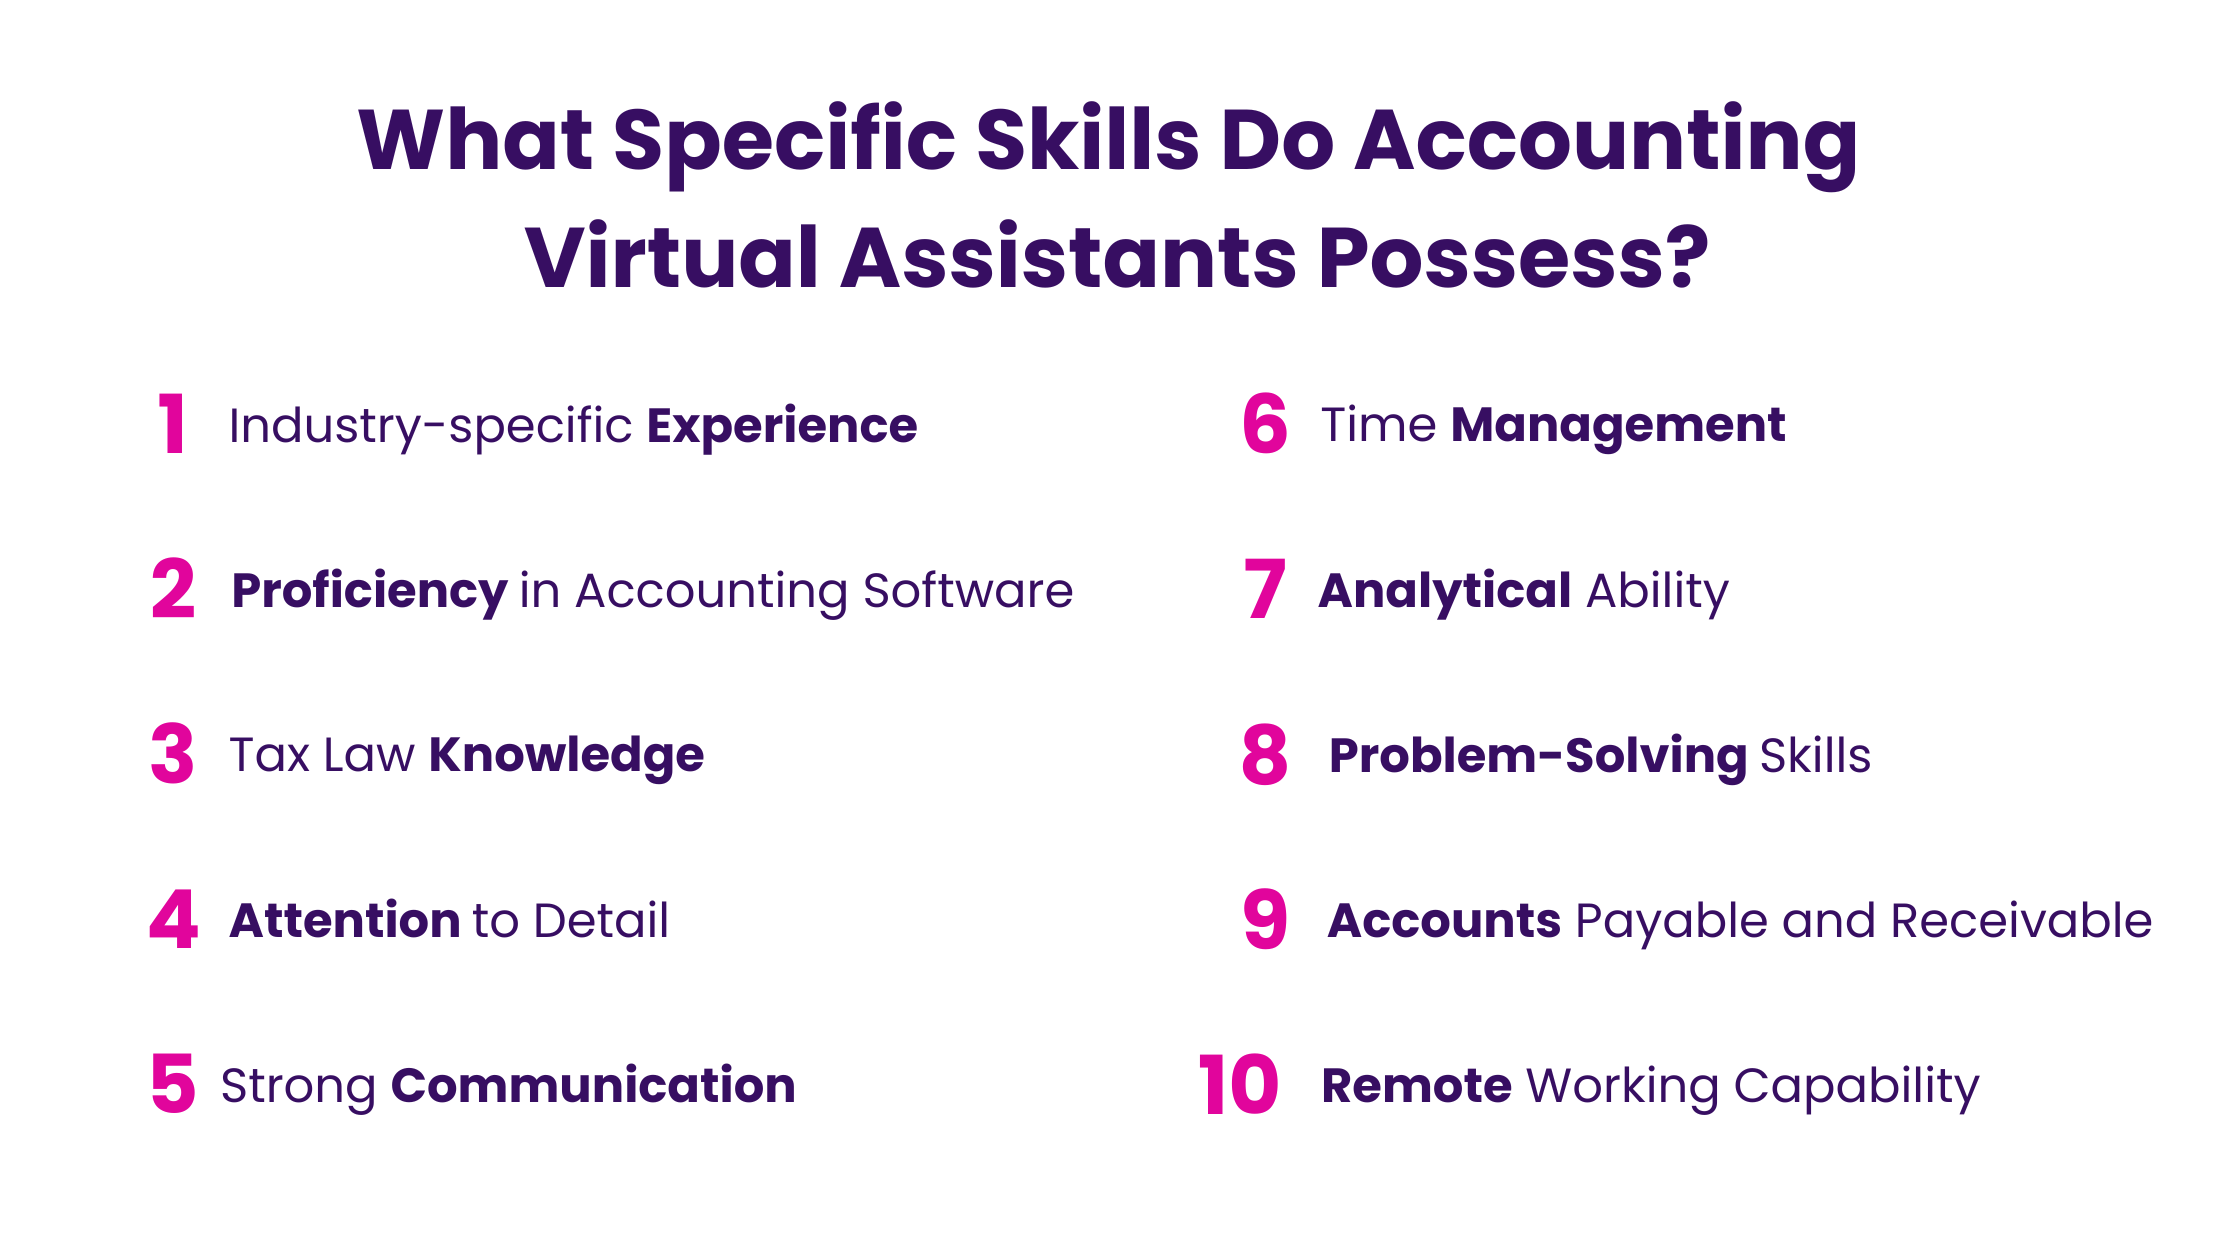 What Specific Skills Do Accounting Virtual Assistants Possess